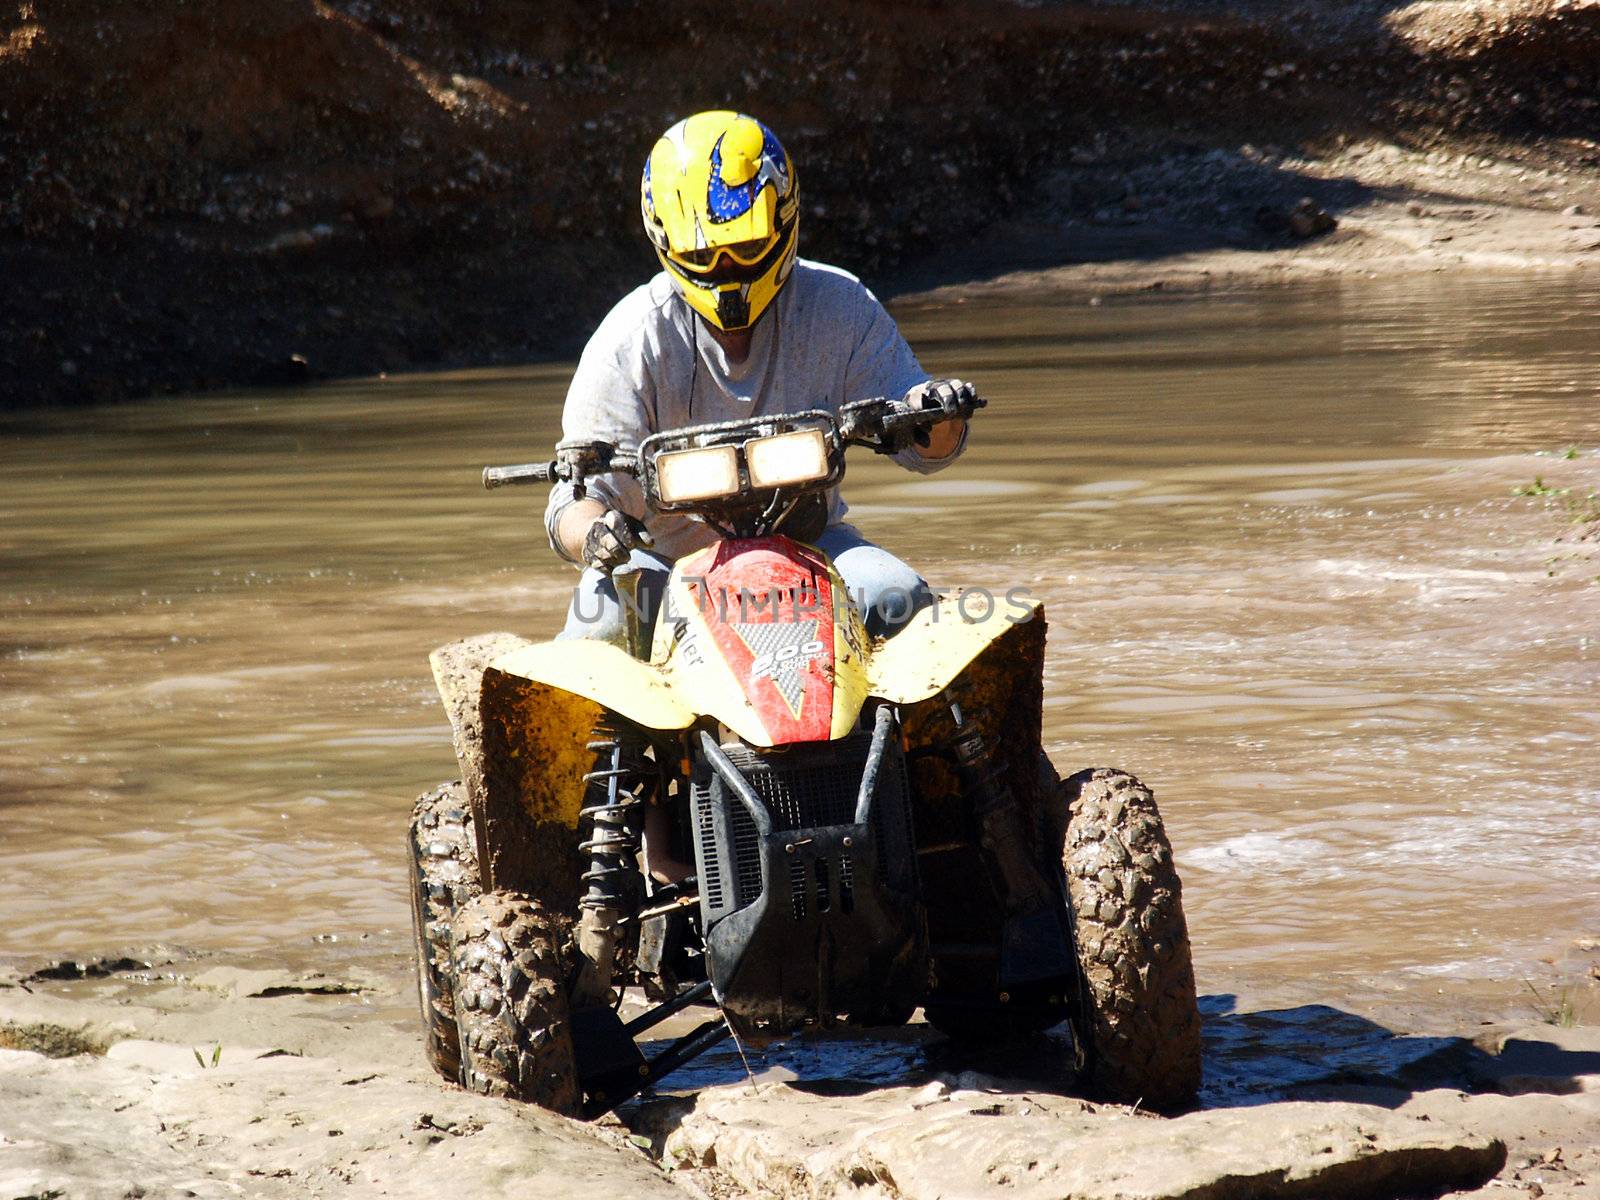 A shot of a young man running some muddy trails on his ATV.